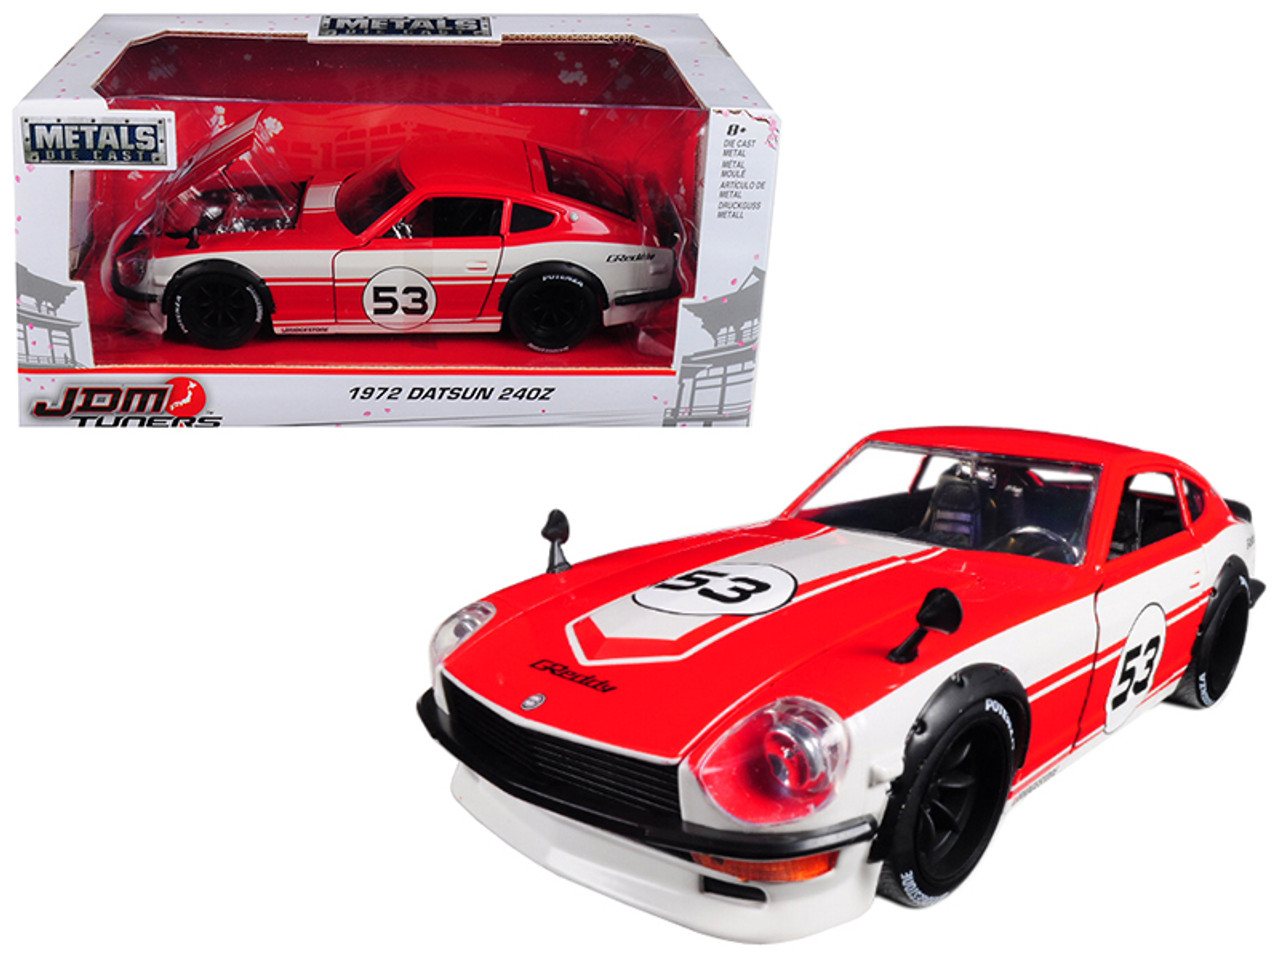 1972 Datsun 240Z #53 Red and White "JDM Tuners" 1/24 Diecast Model Car by Jada